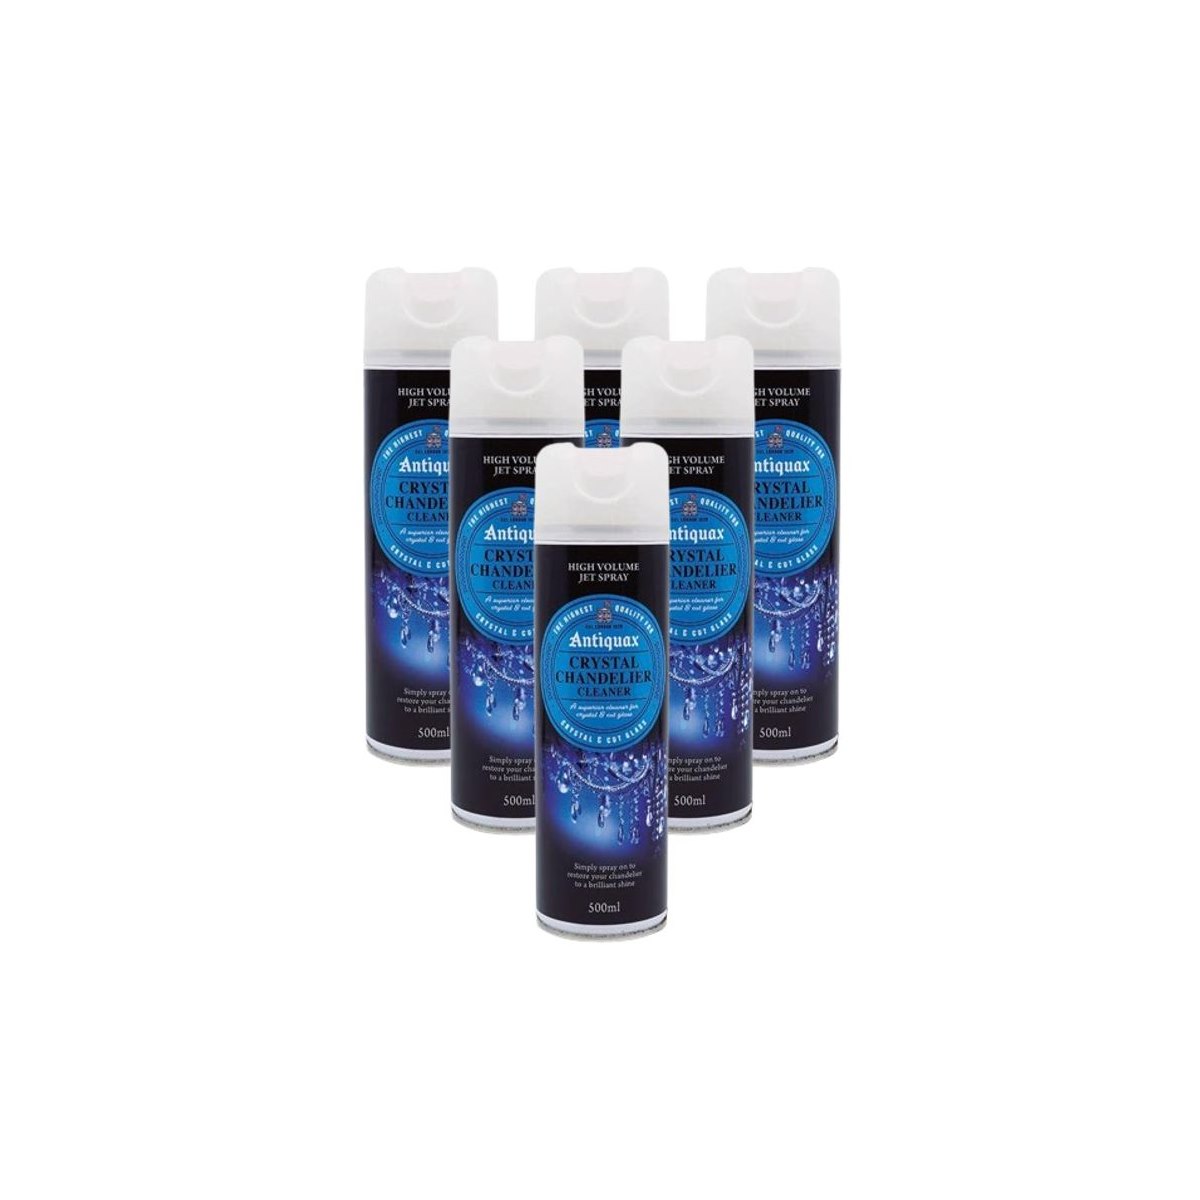 Case of 6 x Antiquax Chandelier and Crystal Cleaner Spray 500ml